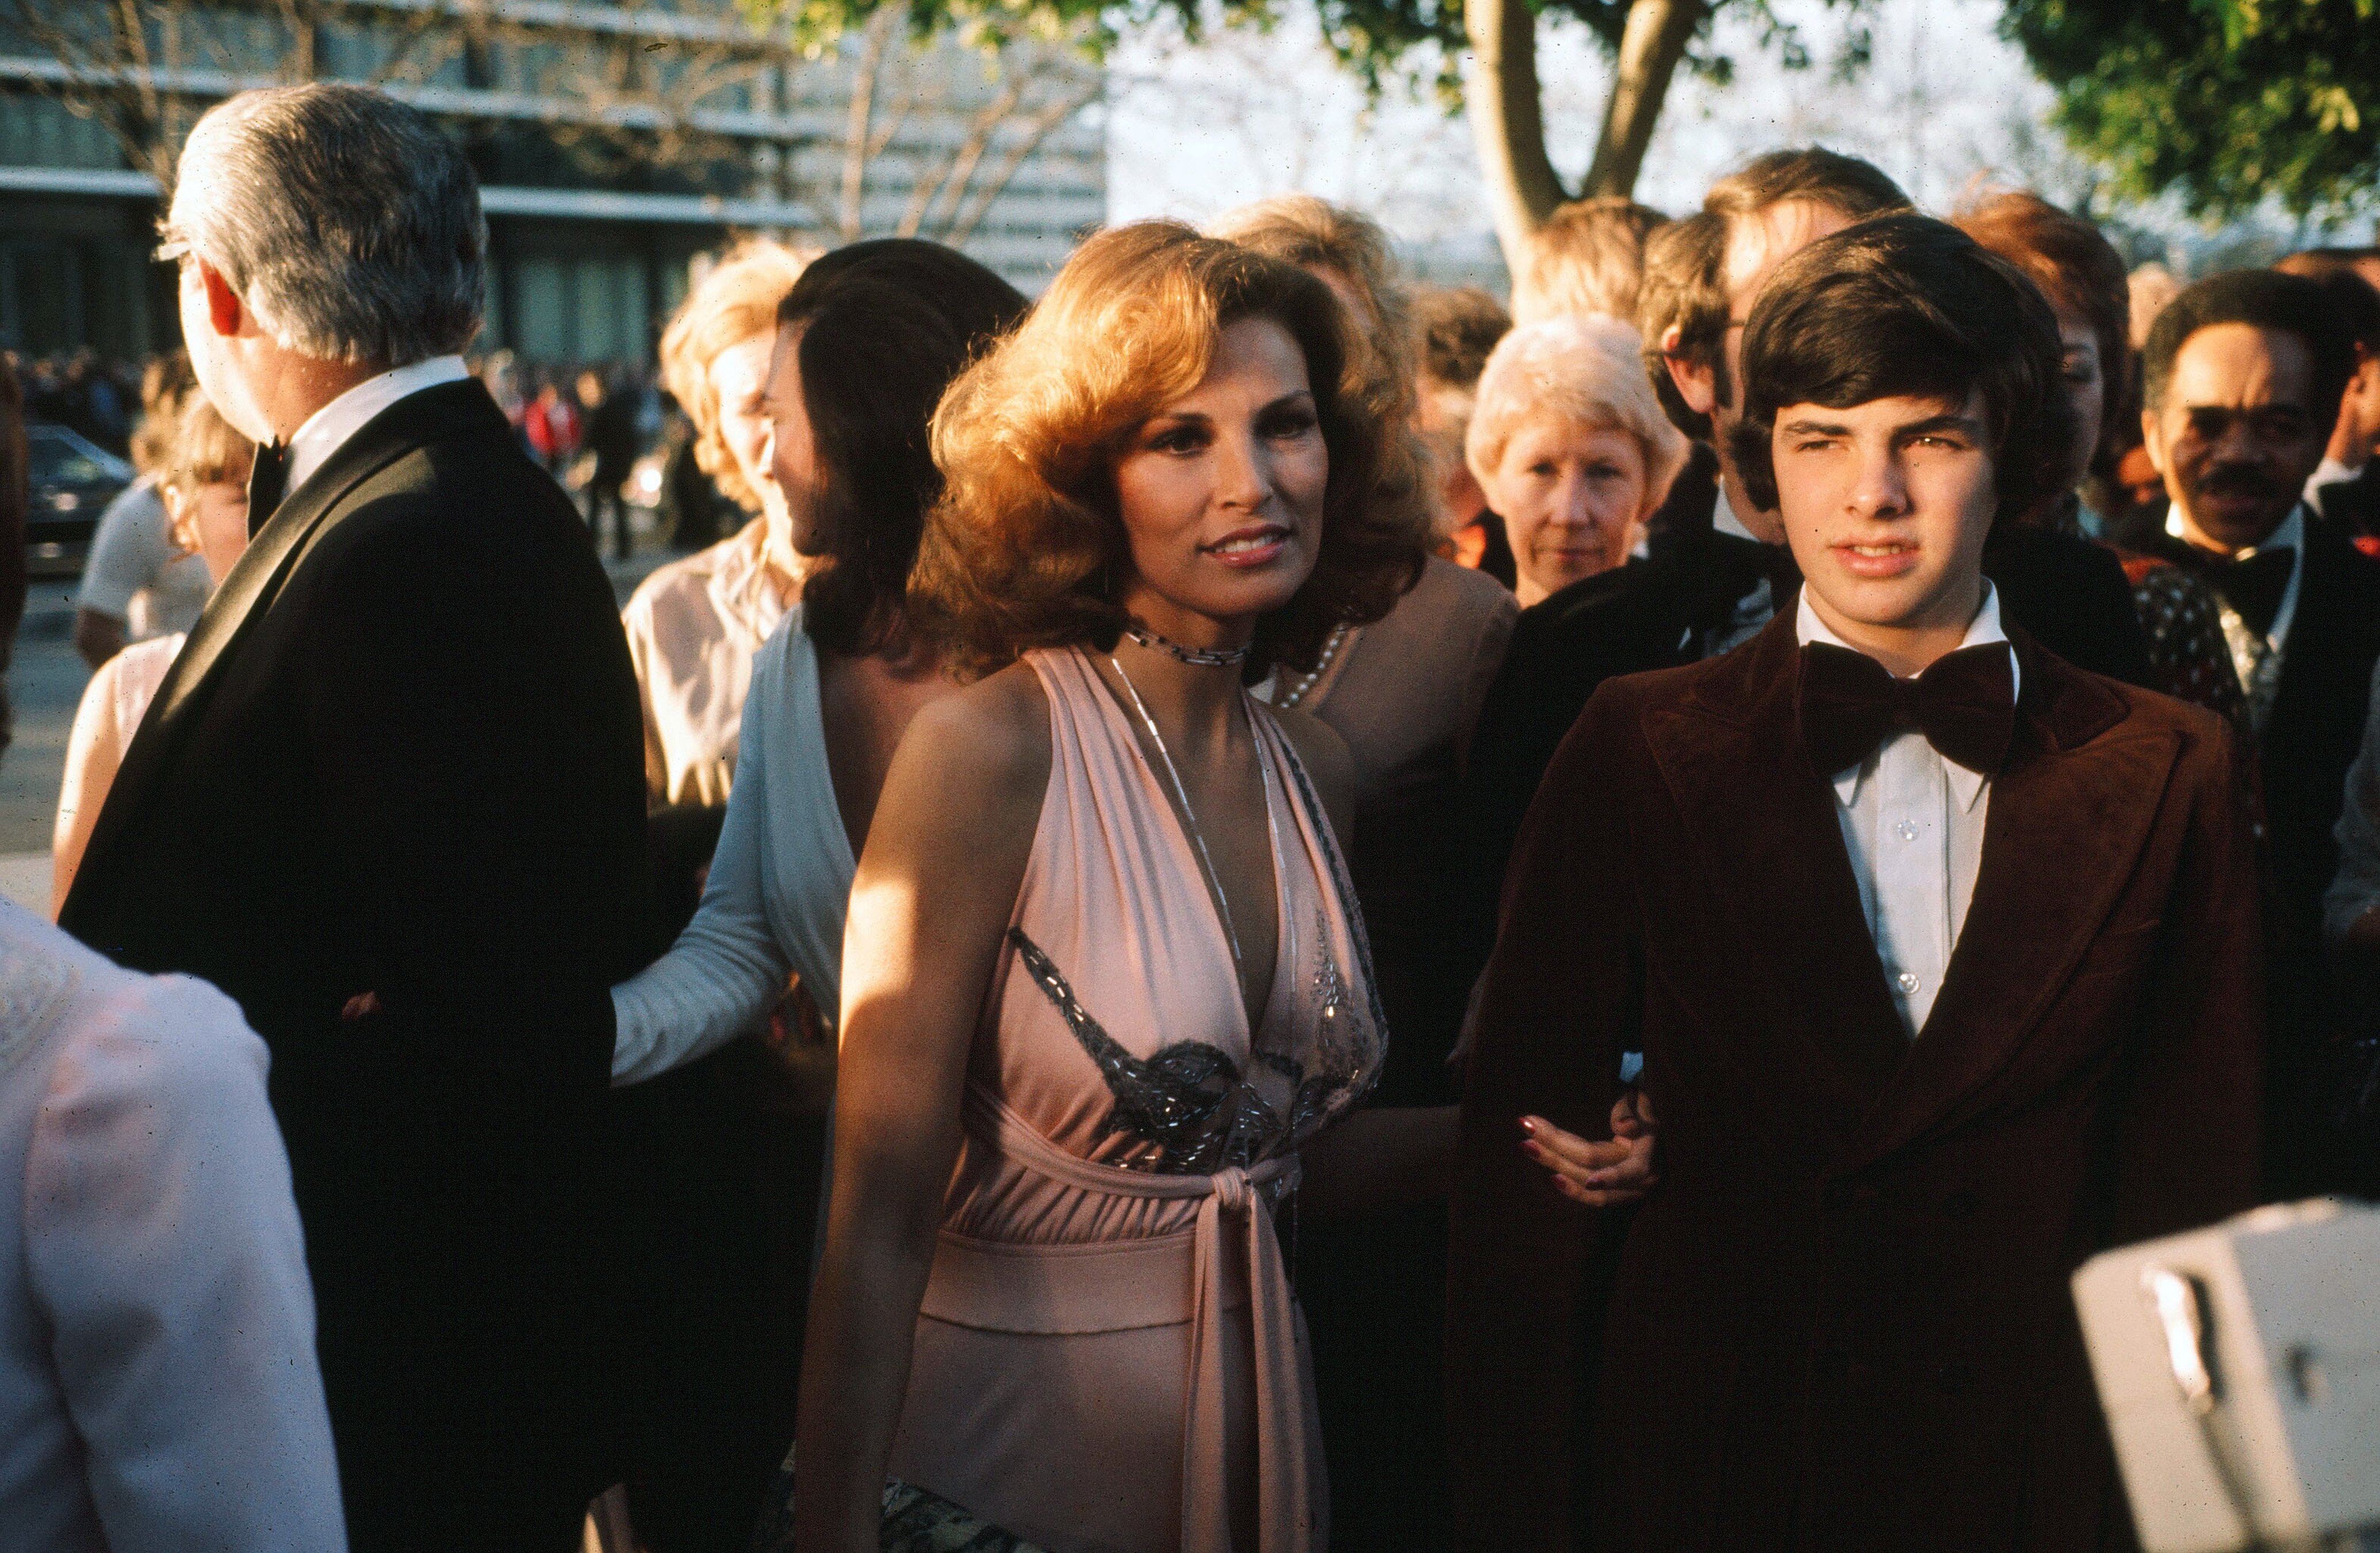 Actress Raquel Welch and son Damon Welch at the 46th Academy Awards in Los Angeles,California. | Source: Getty Images